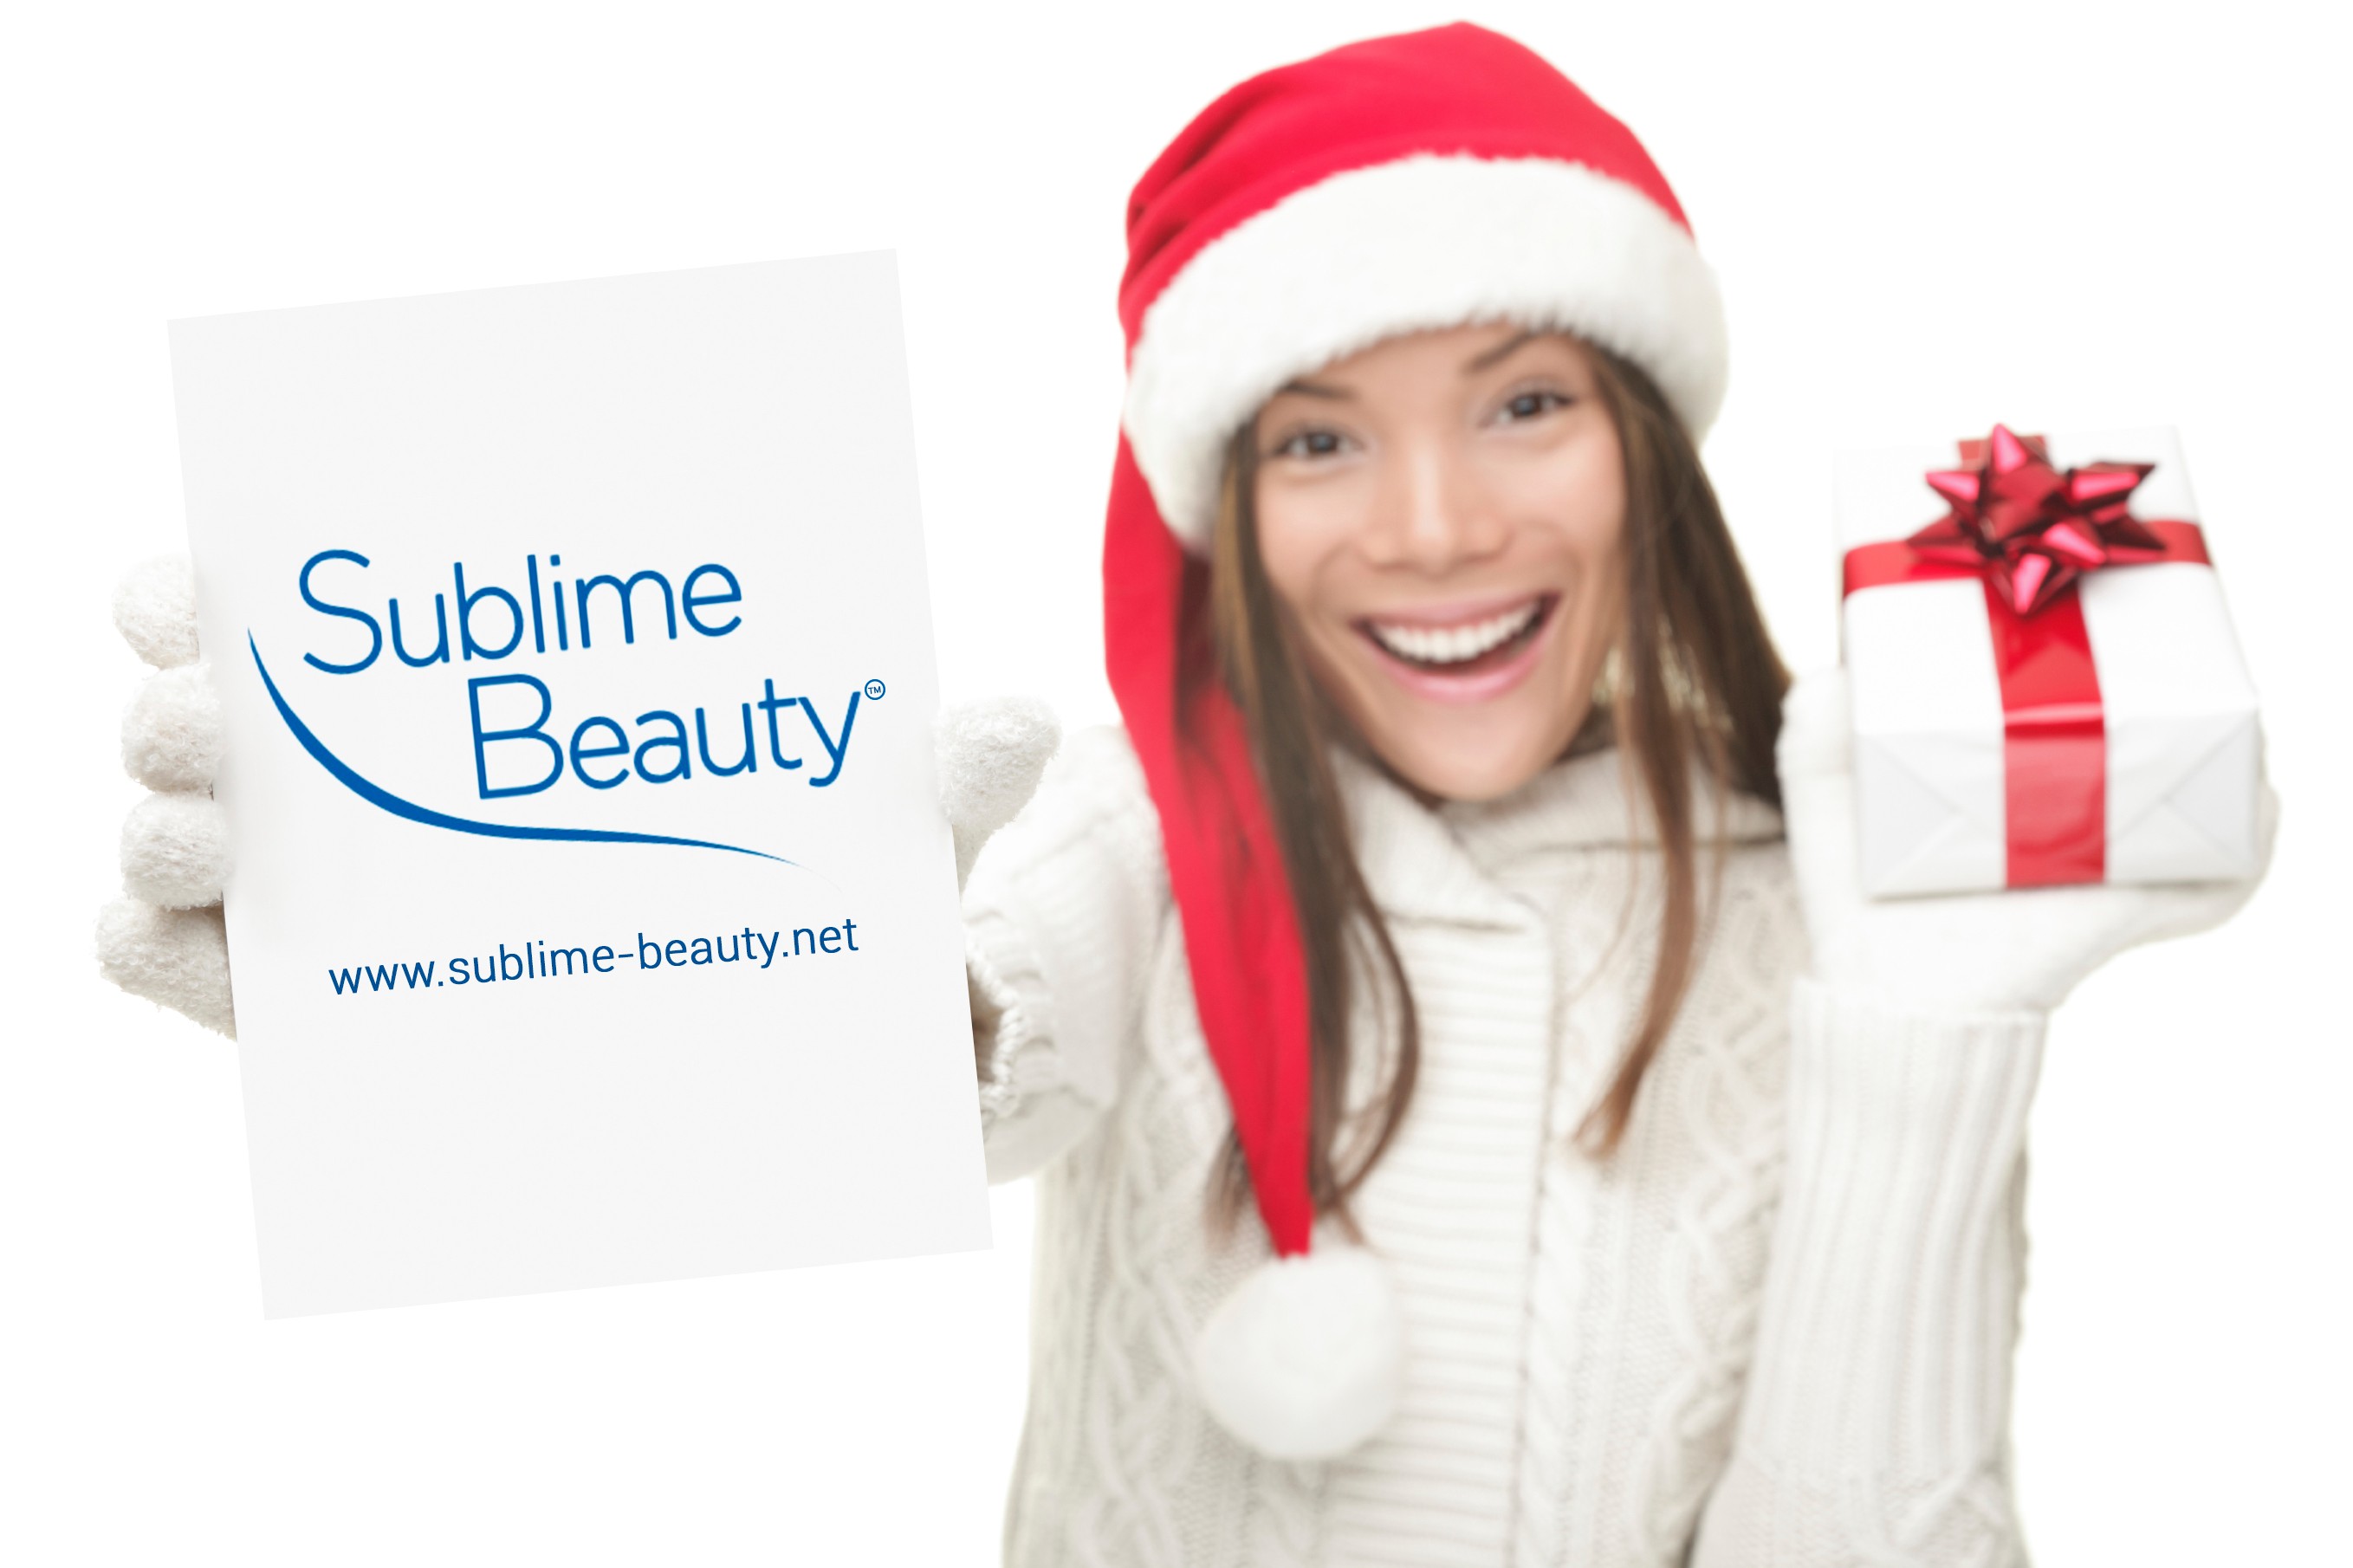 Big Cyber Monday Deals And Discounts Offered At Sublime Beauty® Now 